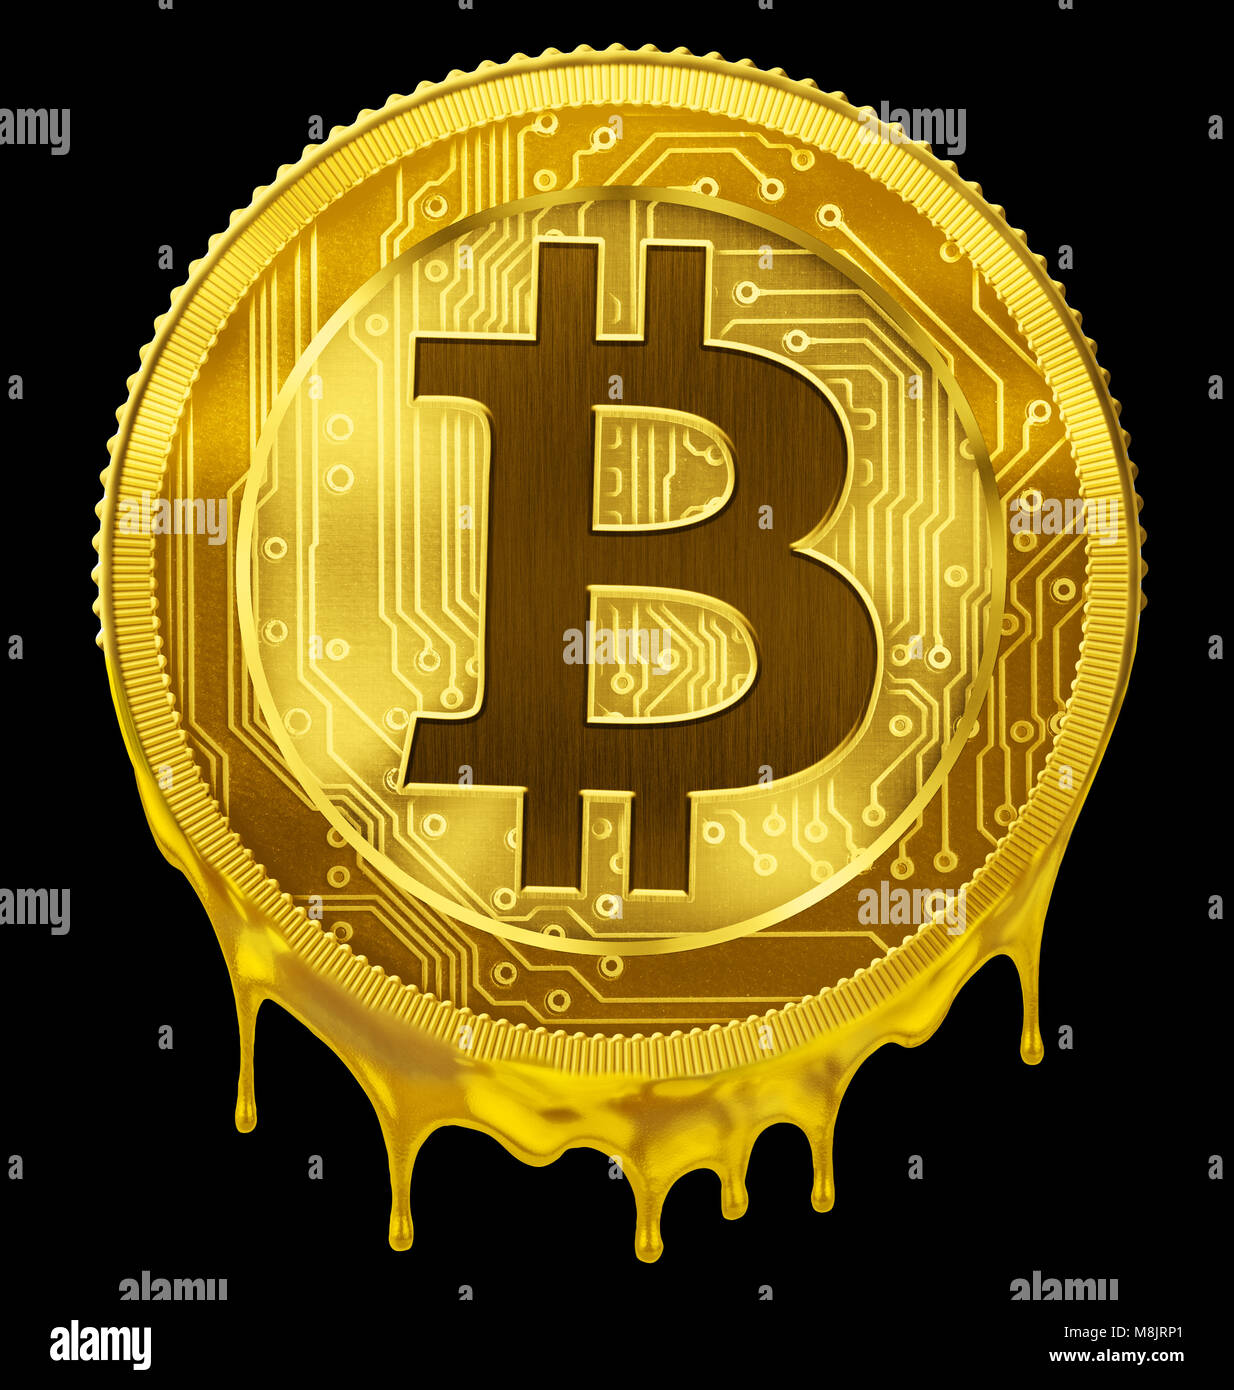 Melted Bitcoin or BTC failure concept 3d illustration Stock Photo